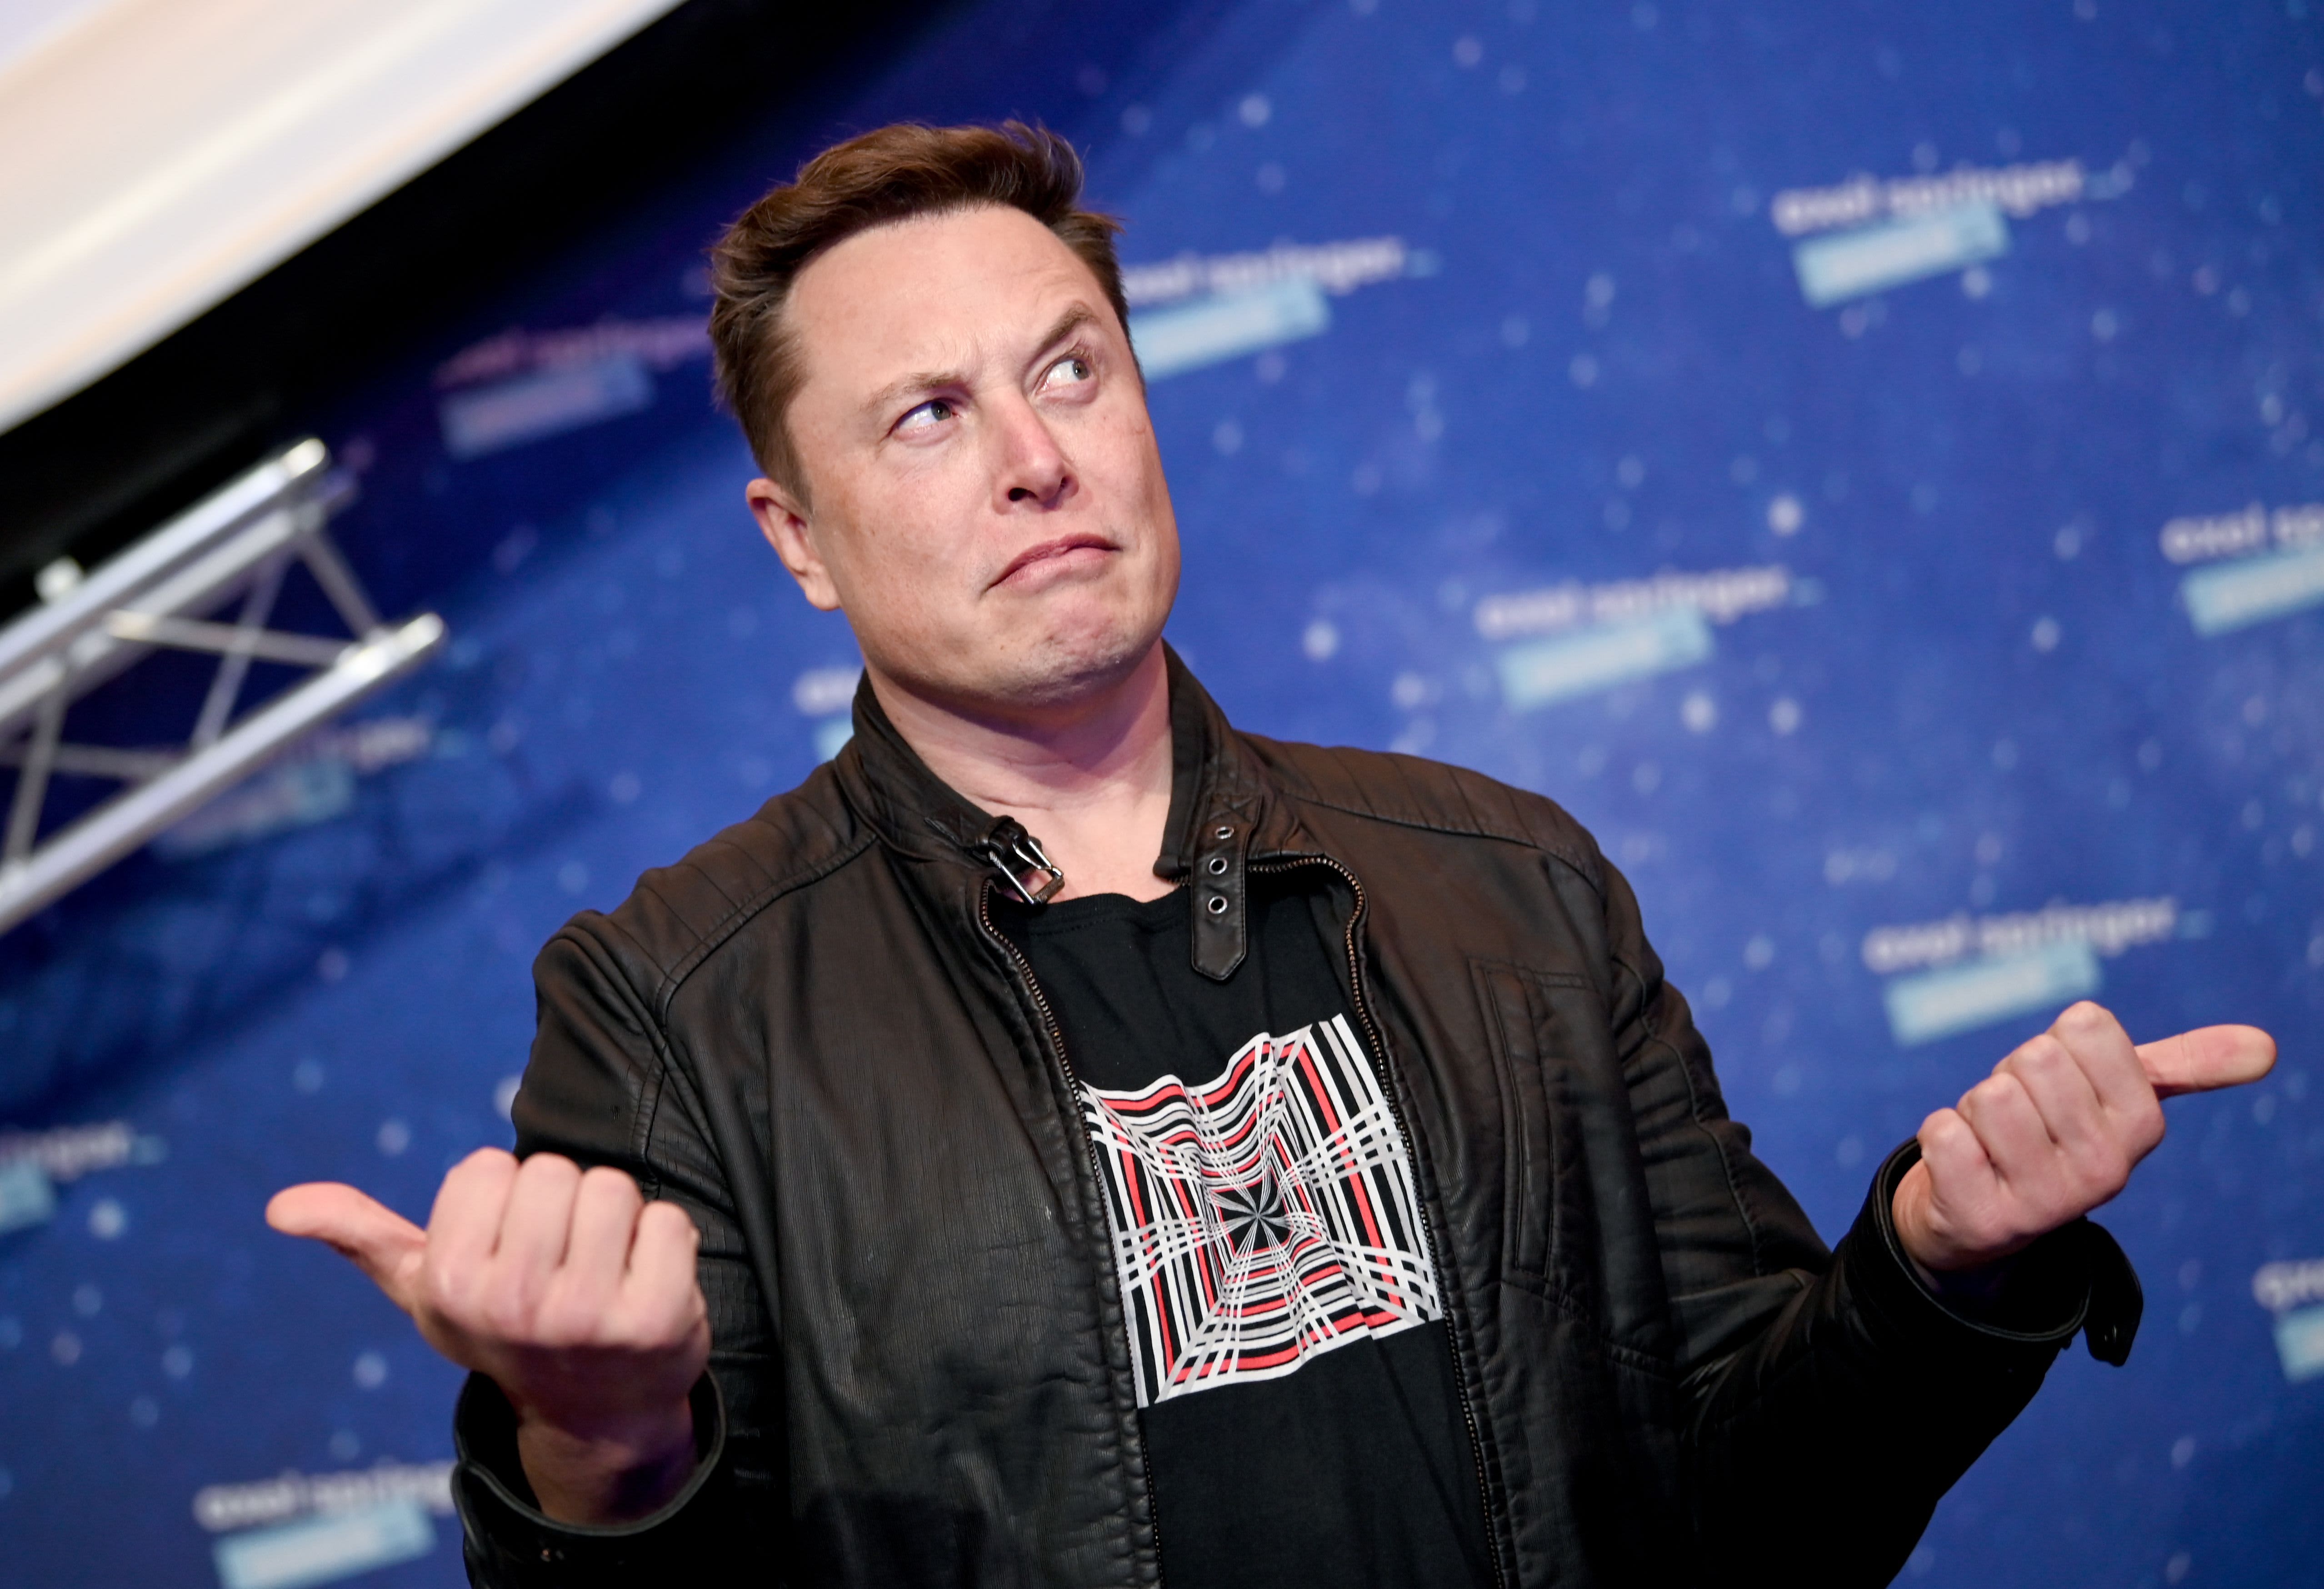 Elon Musk pondered the sale of Tesla to Apple, saying Tim Cook would not meet